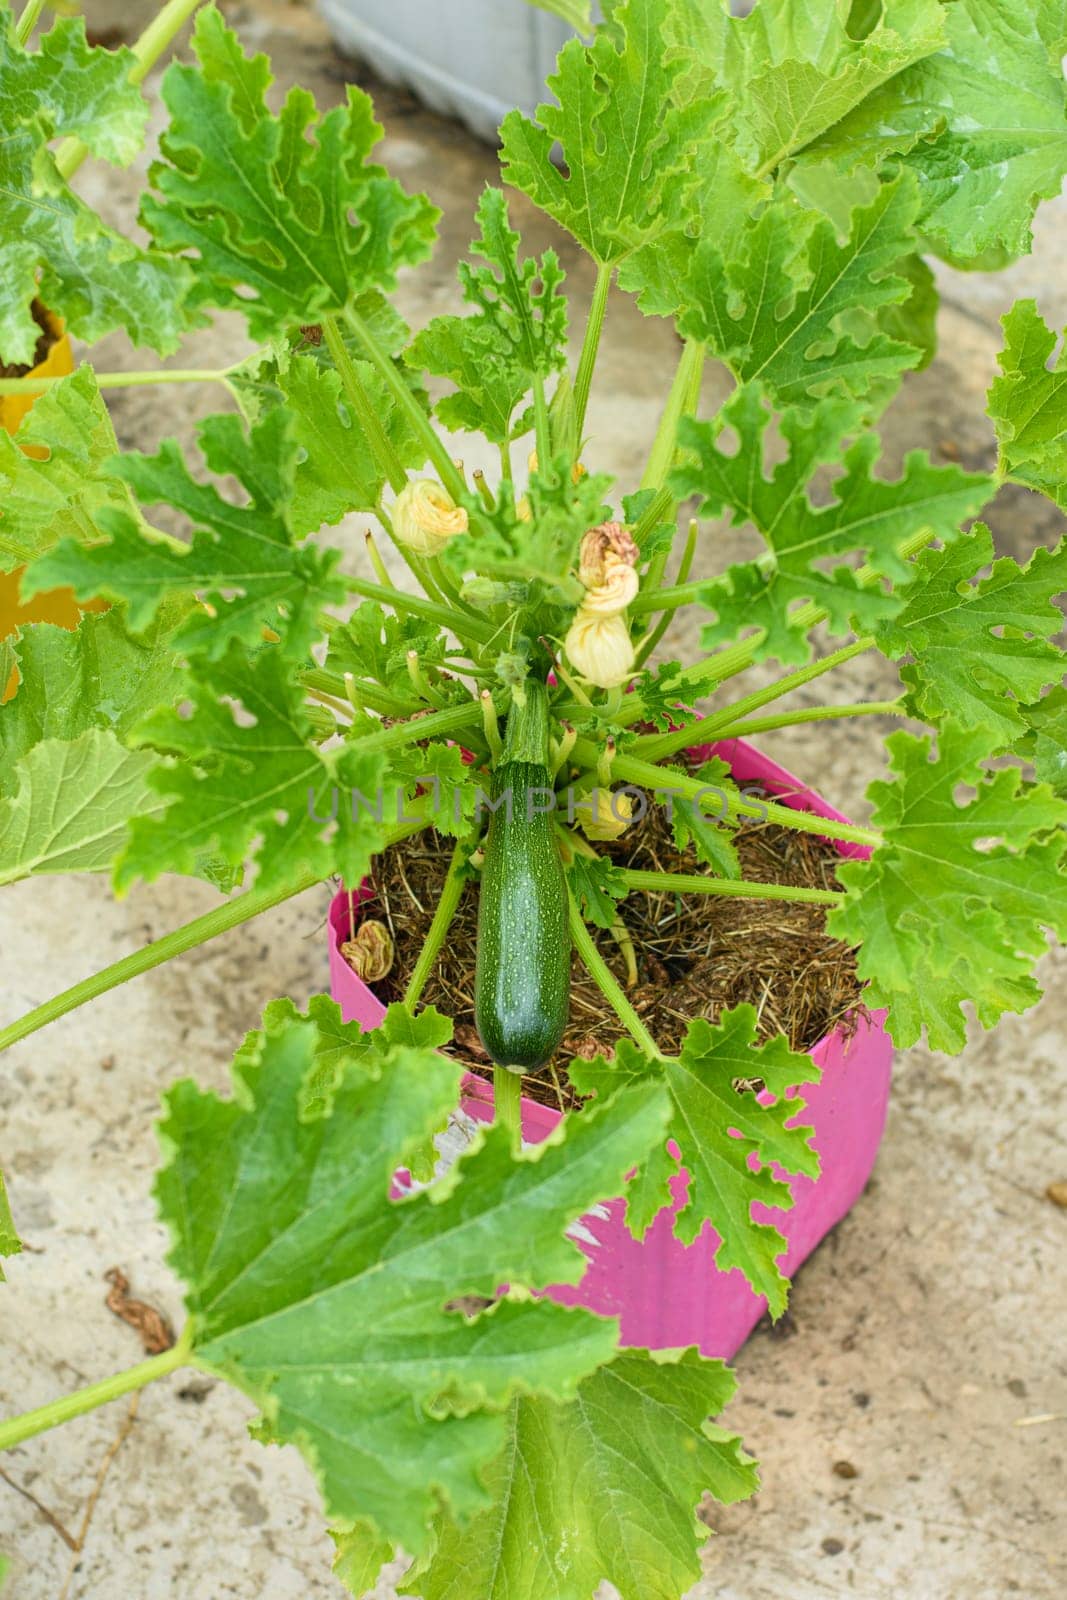 Fruiting of zucchini grown in plastic pots